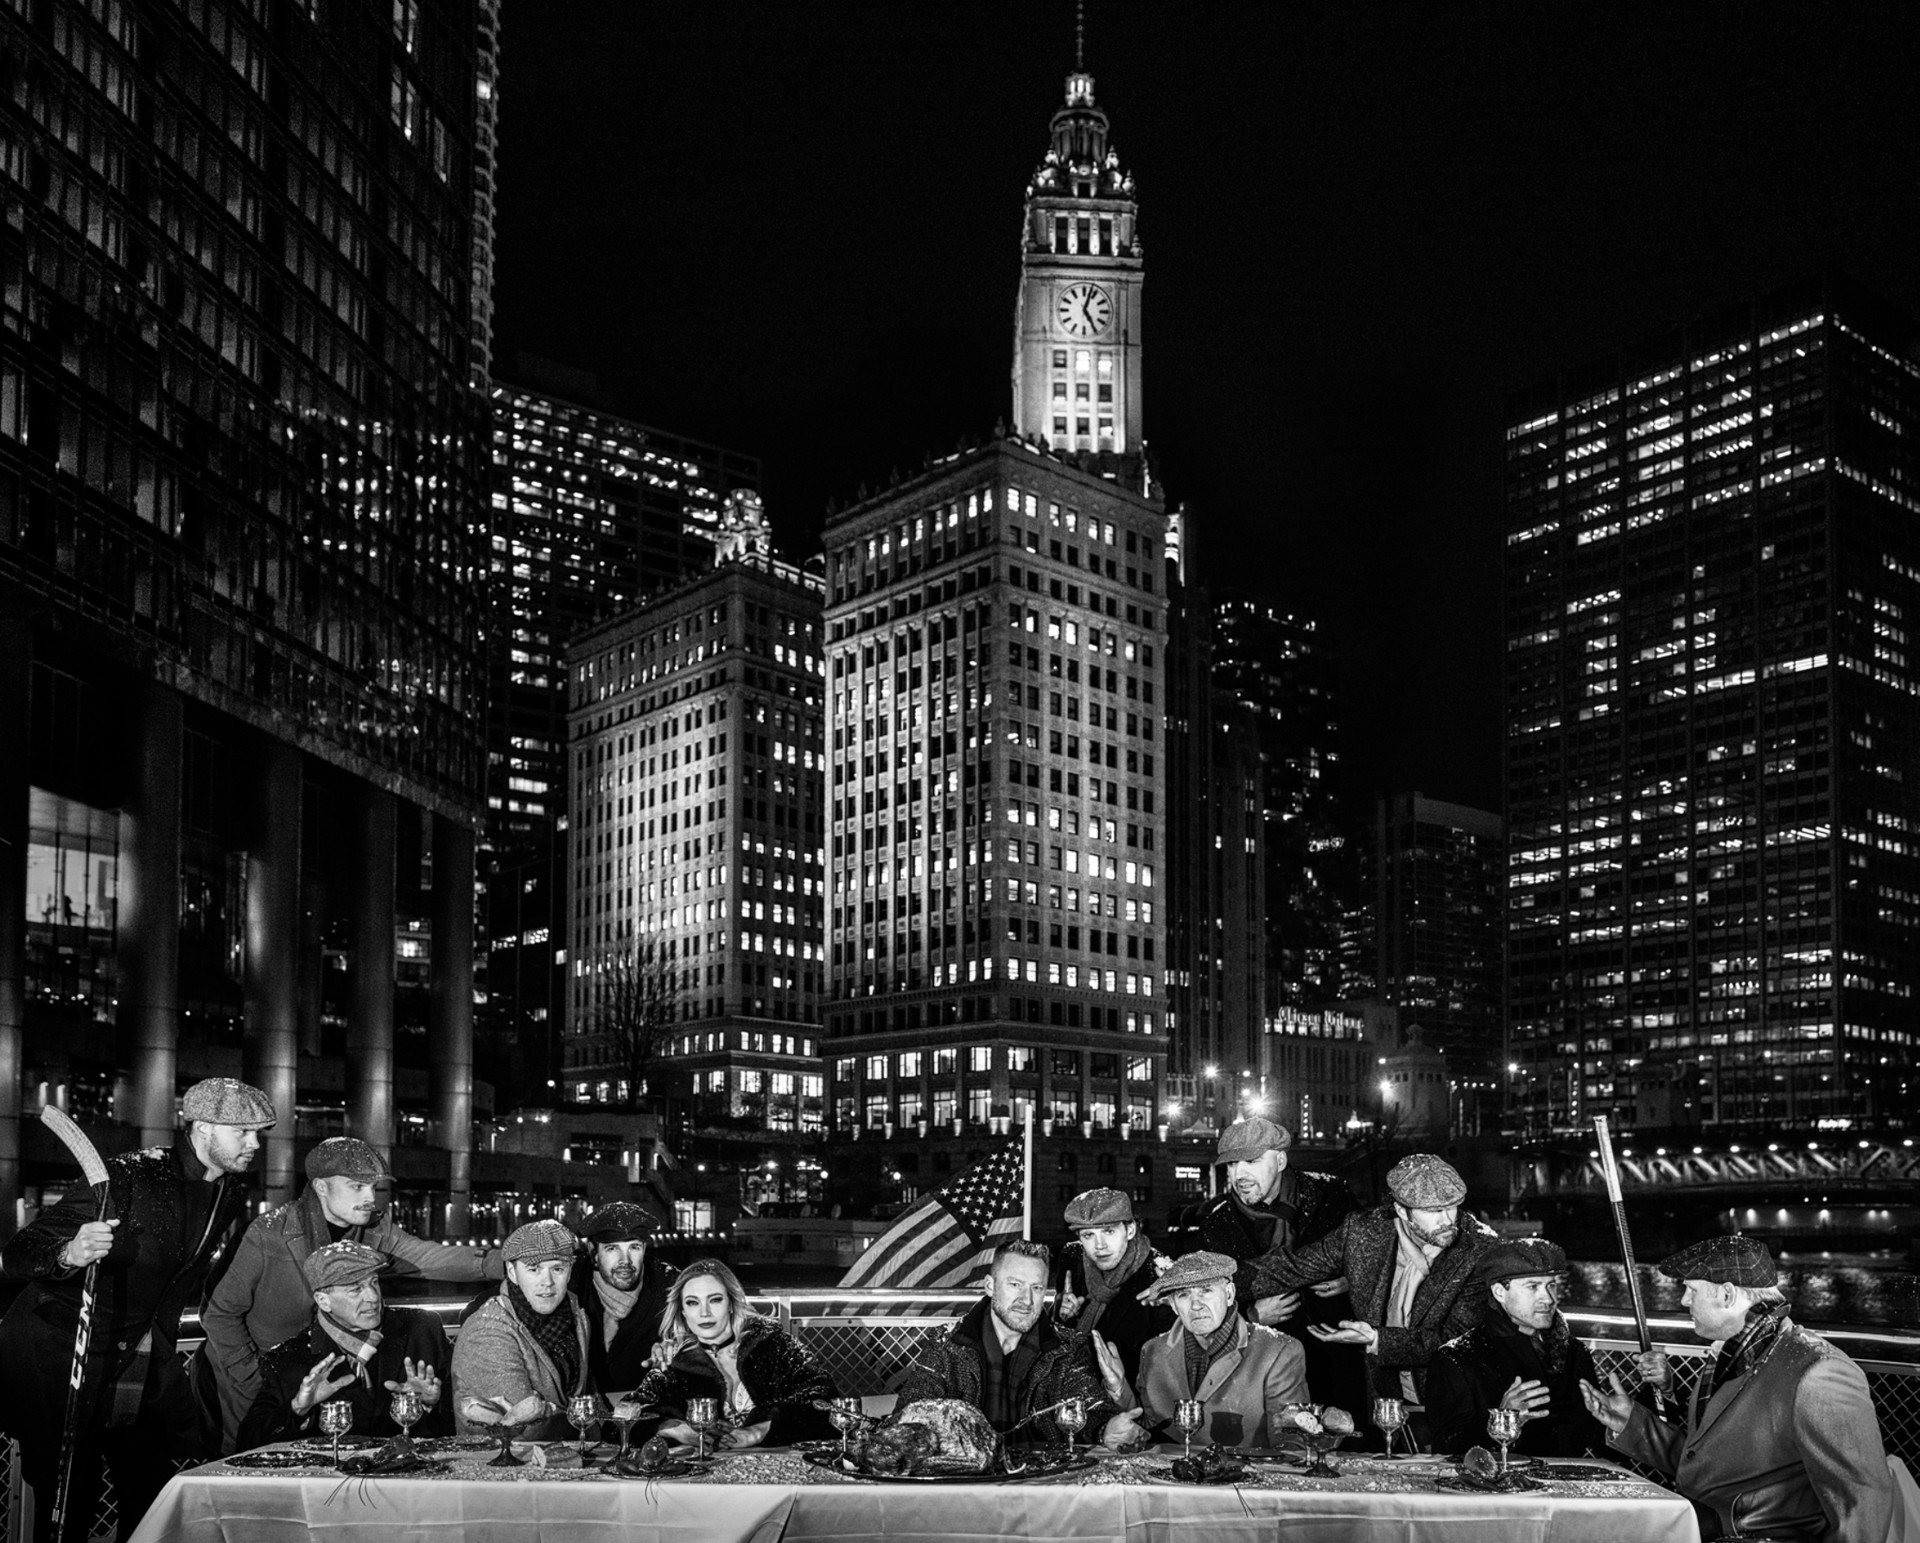 The Last Supper in Chicago by David Yarrow